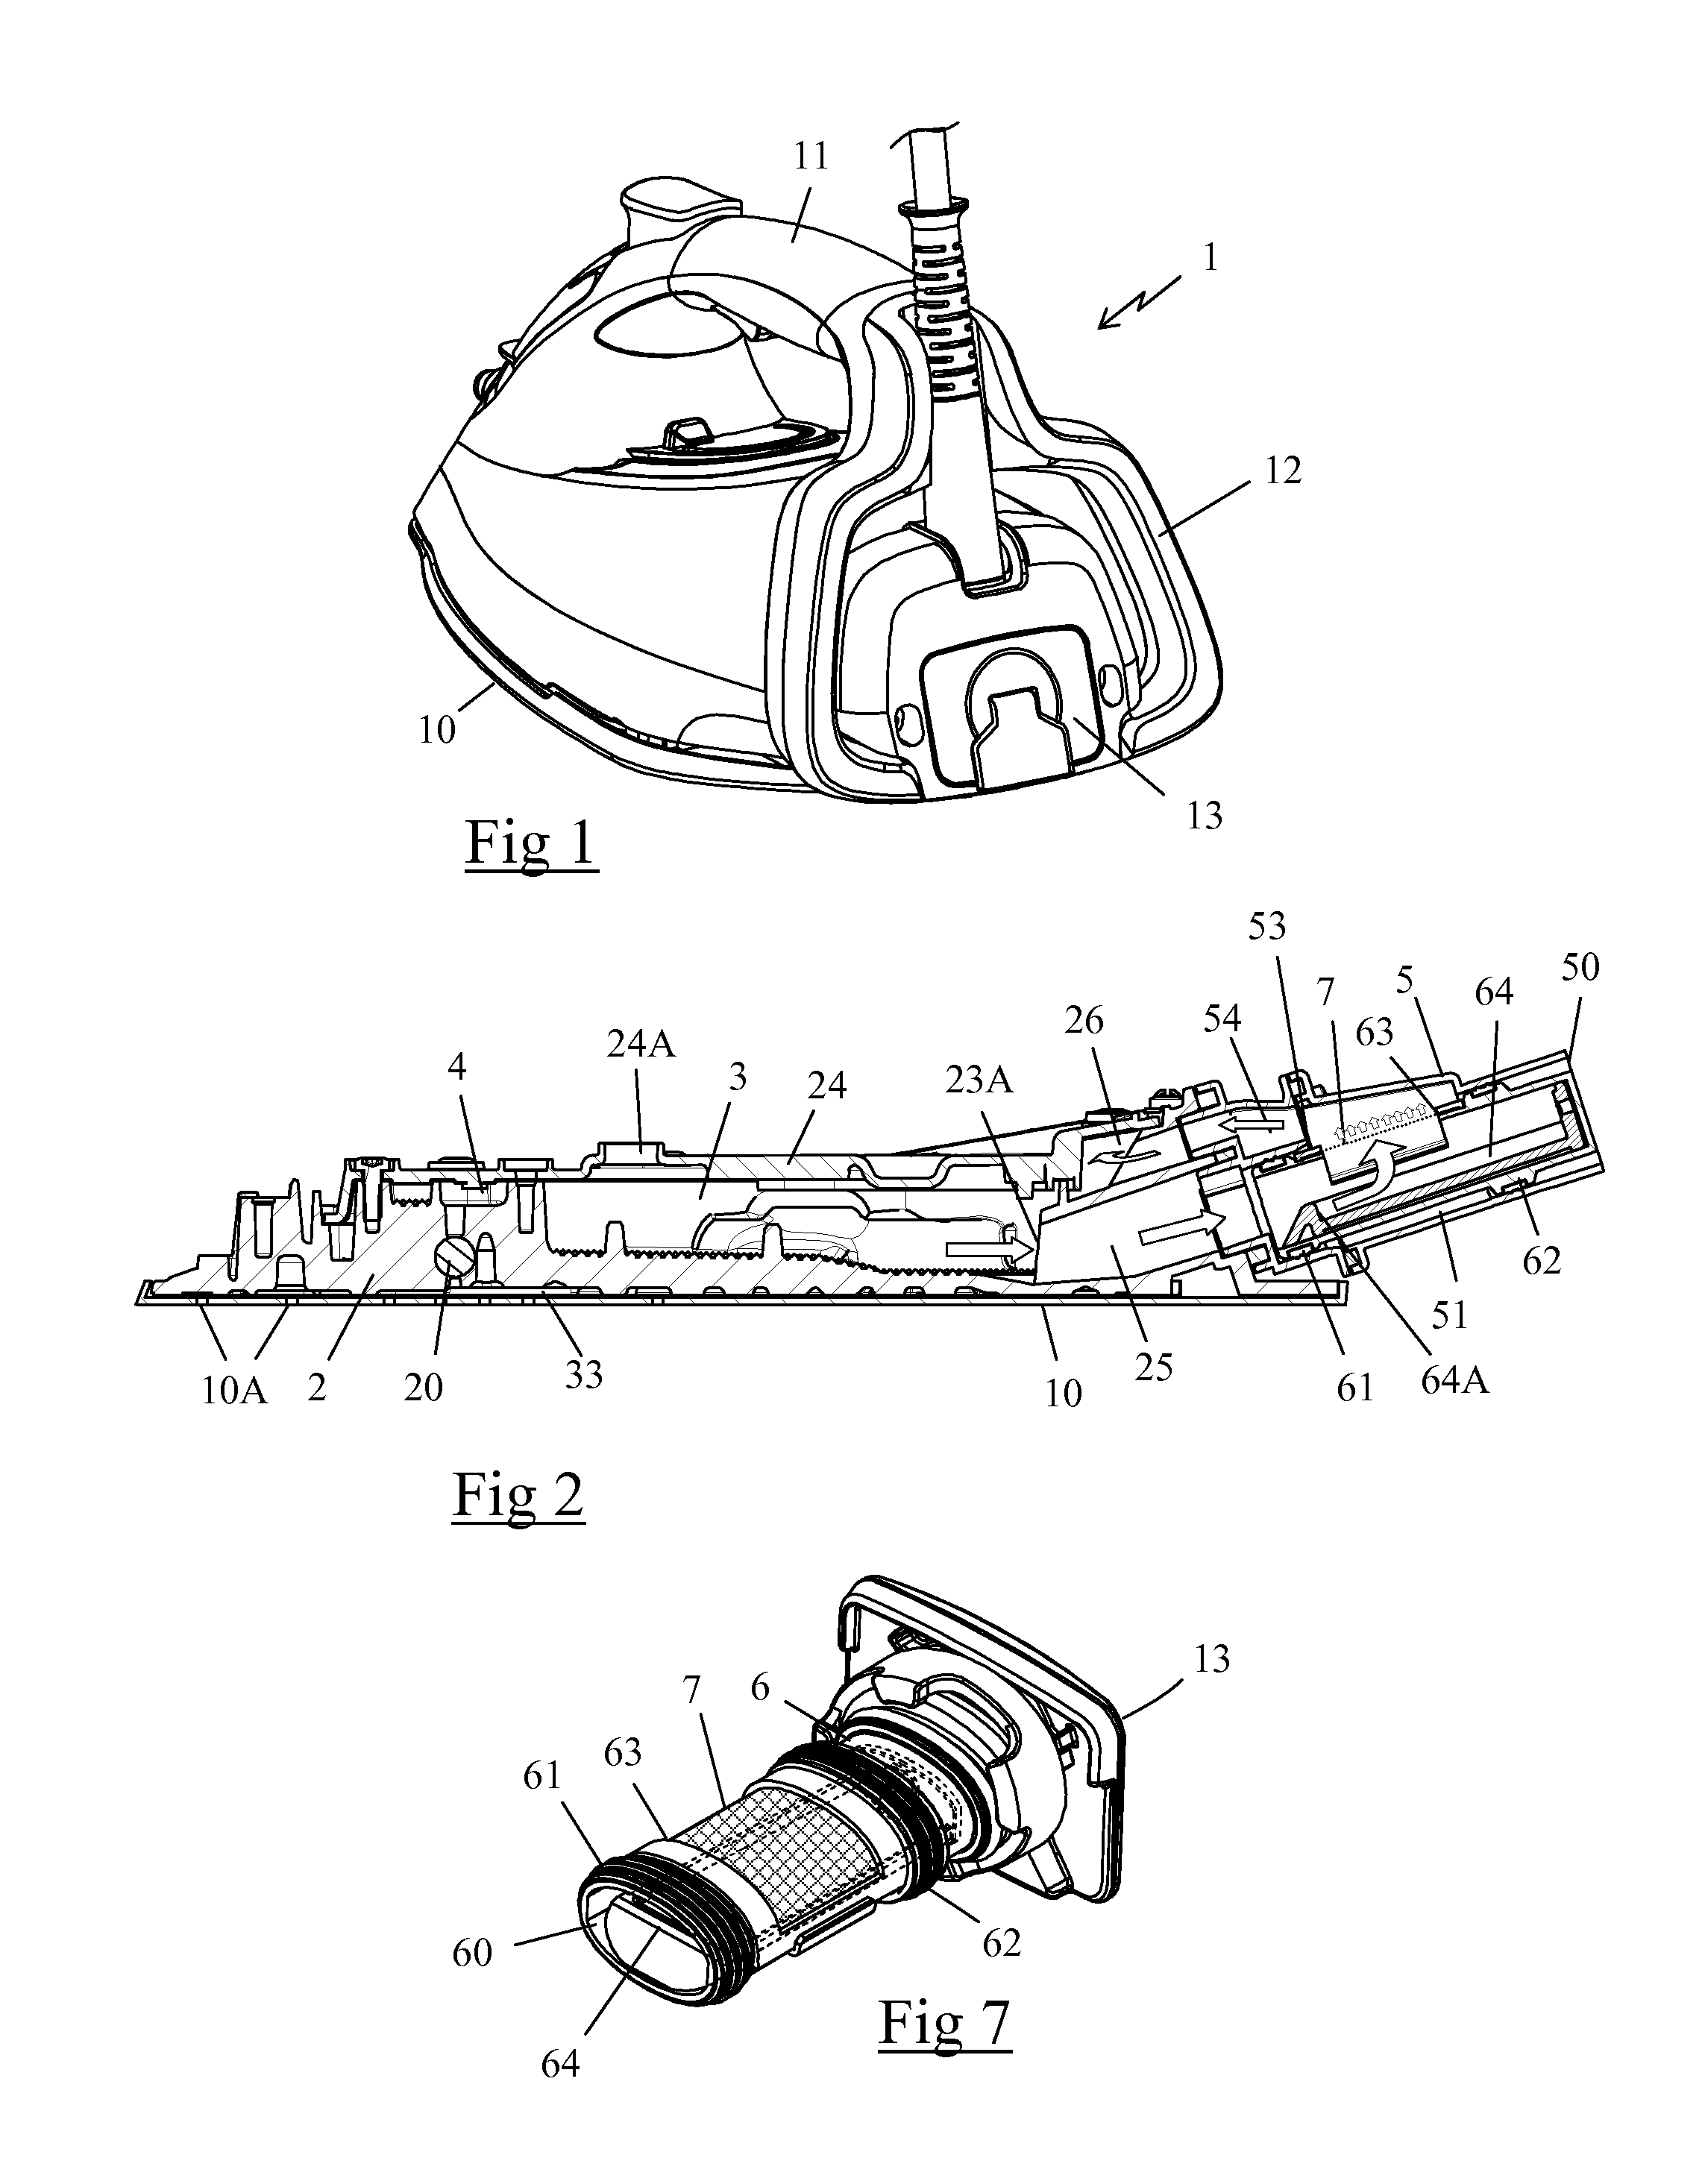 Household Appliance for Ironing with a Filter for Retaining Mineral Particles Carried by the Steam